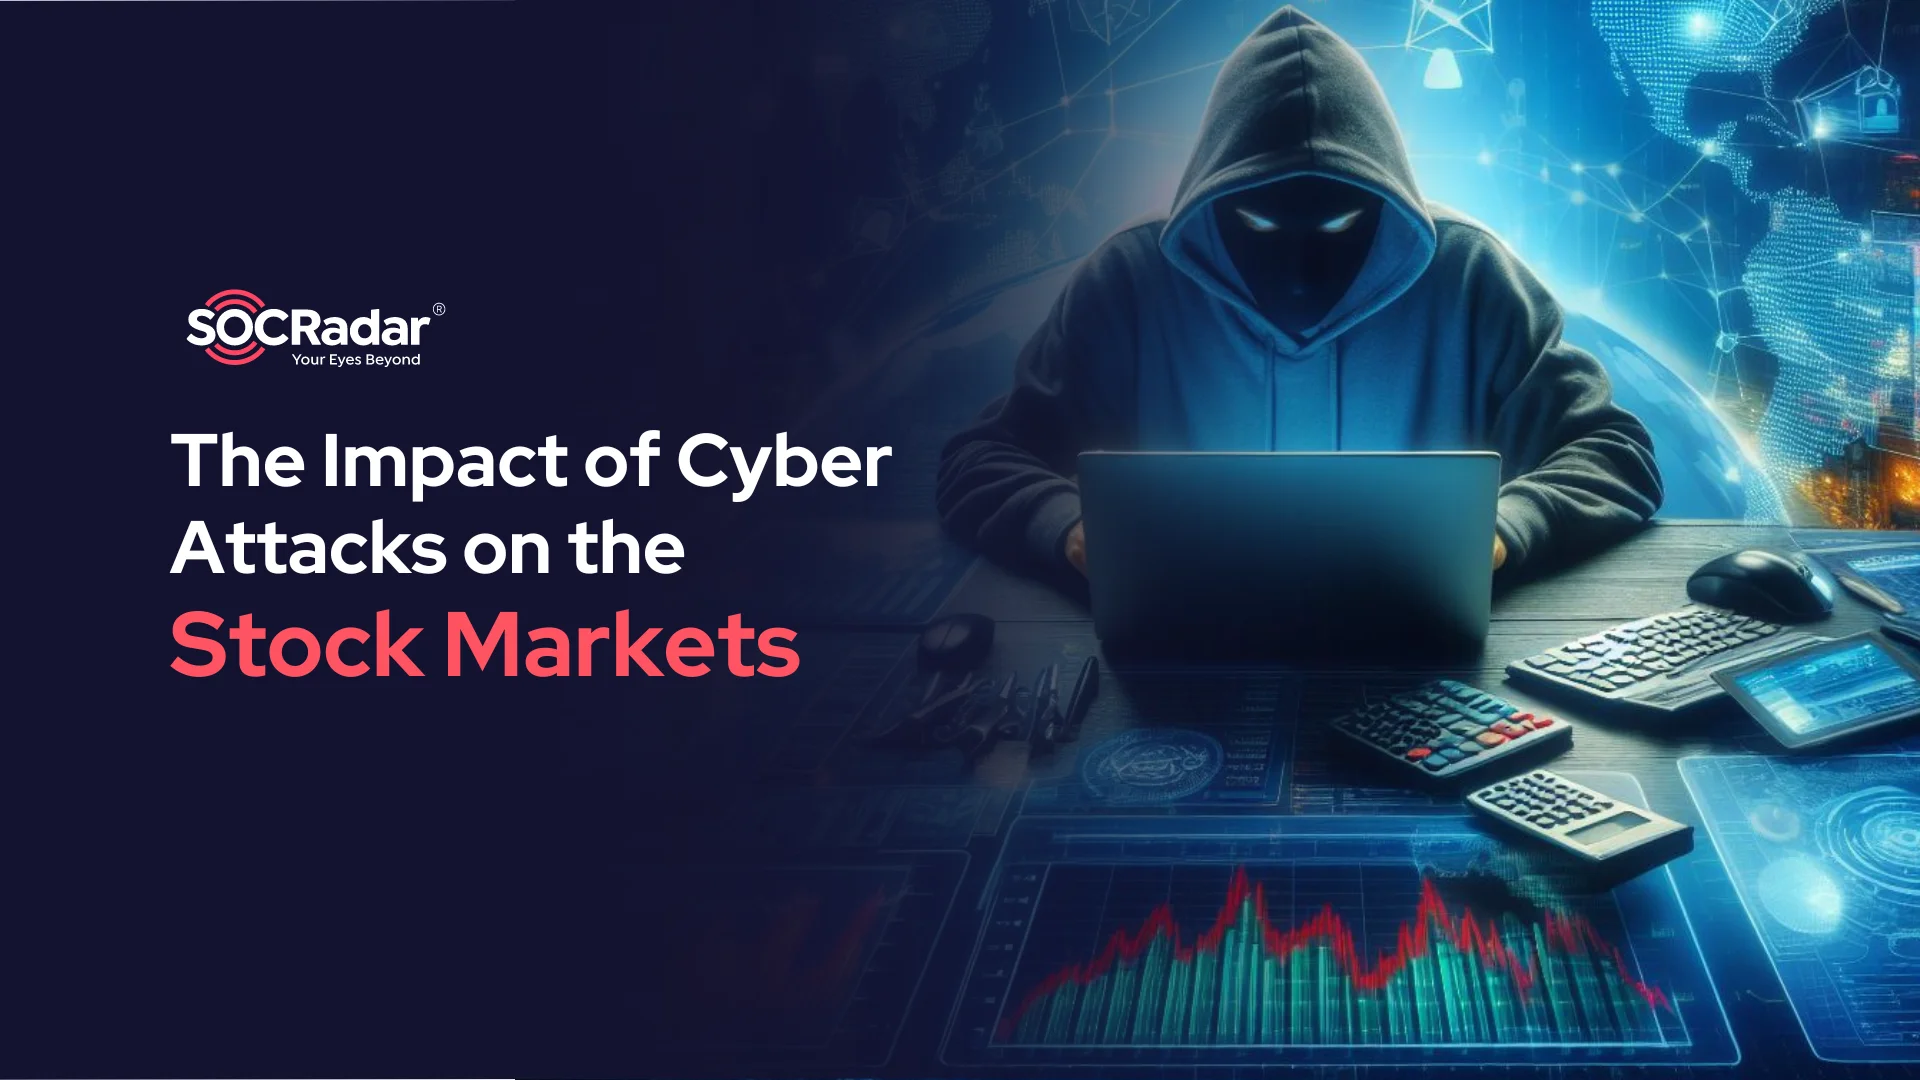 SOCRadar® Cyber Intelligence Inc. | The Impact of Cyber Attacks on the Stock Markets